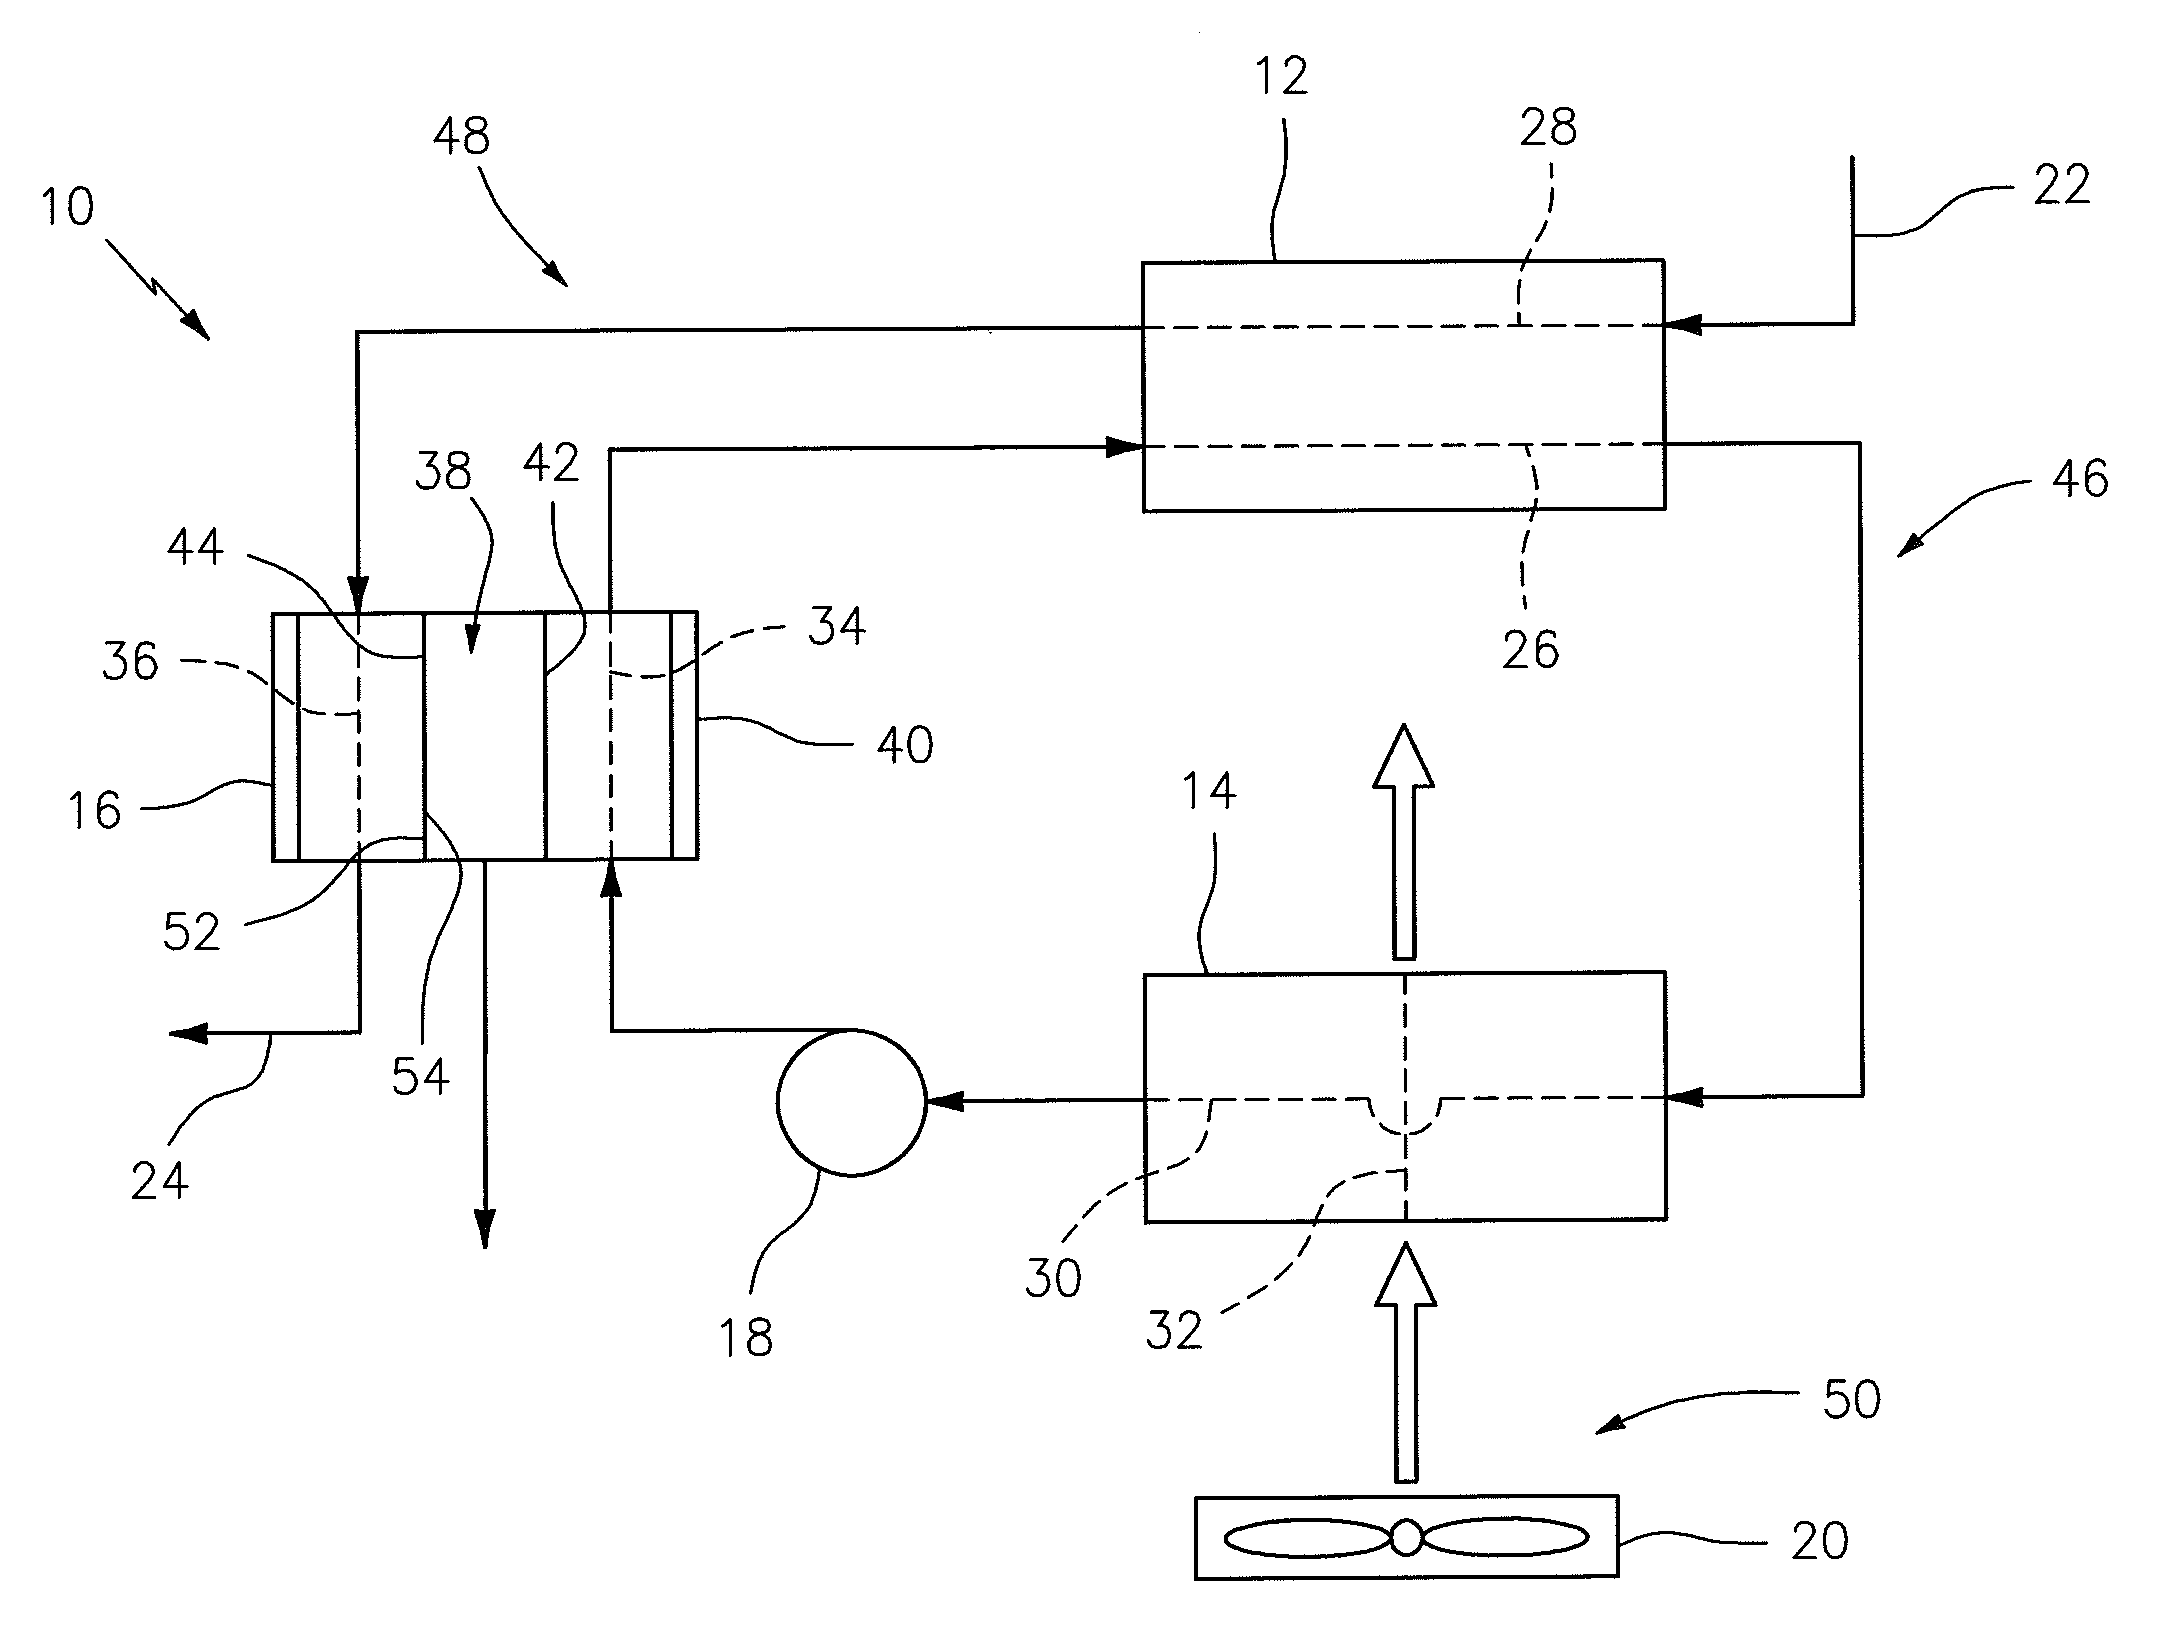 Heat exchange system configured with a membrane contactor